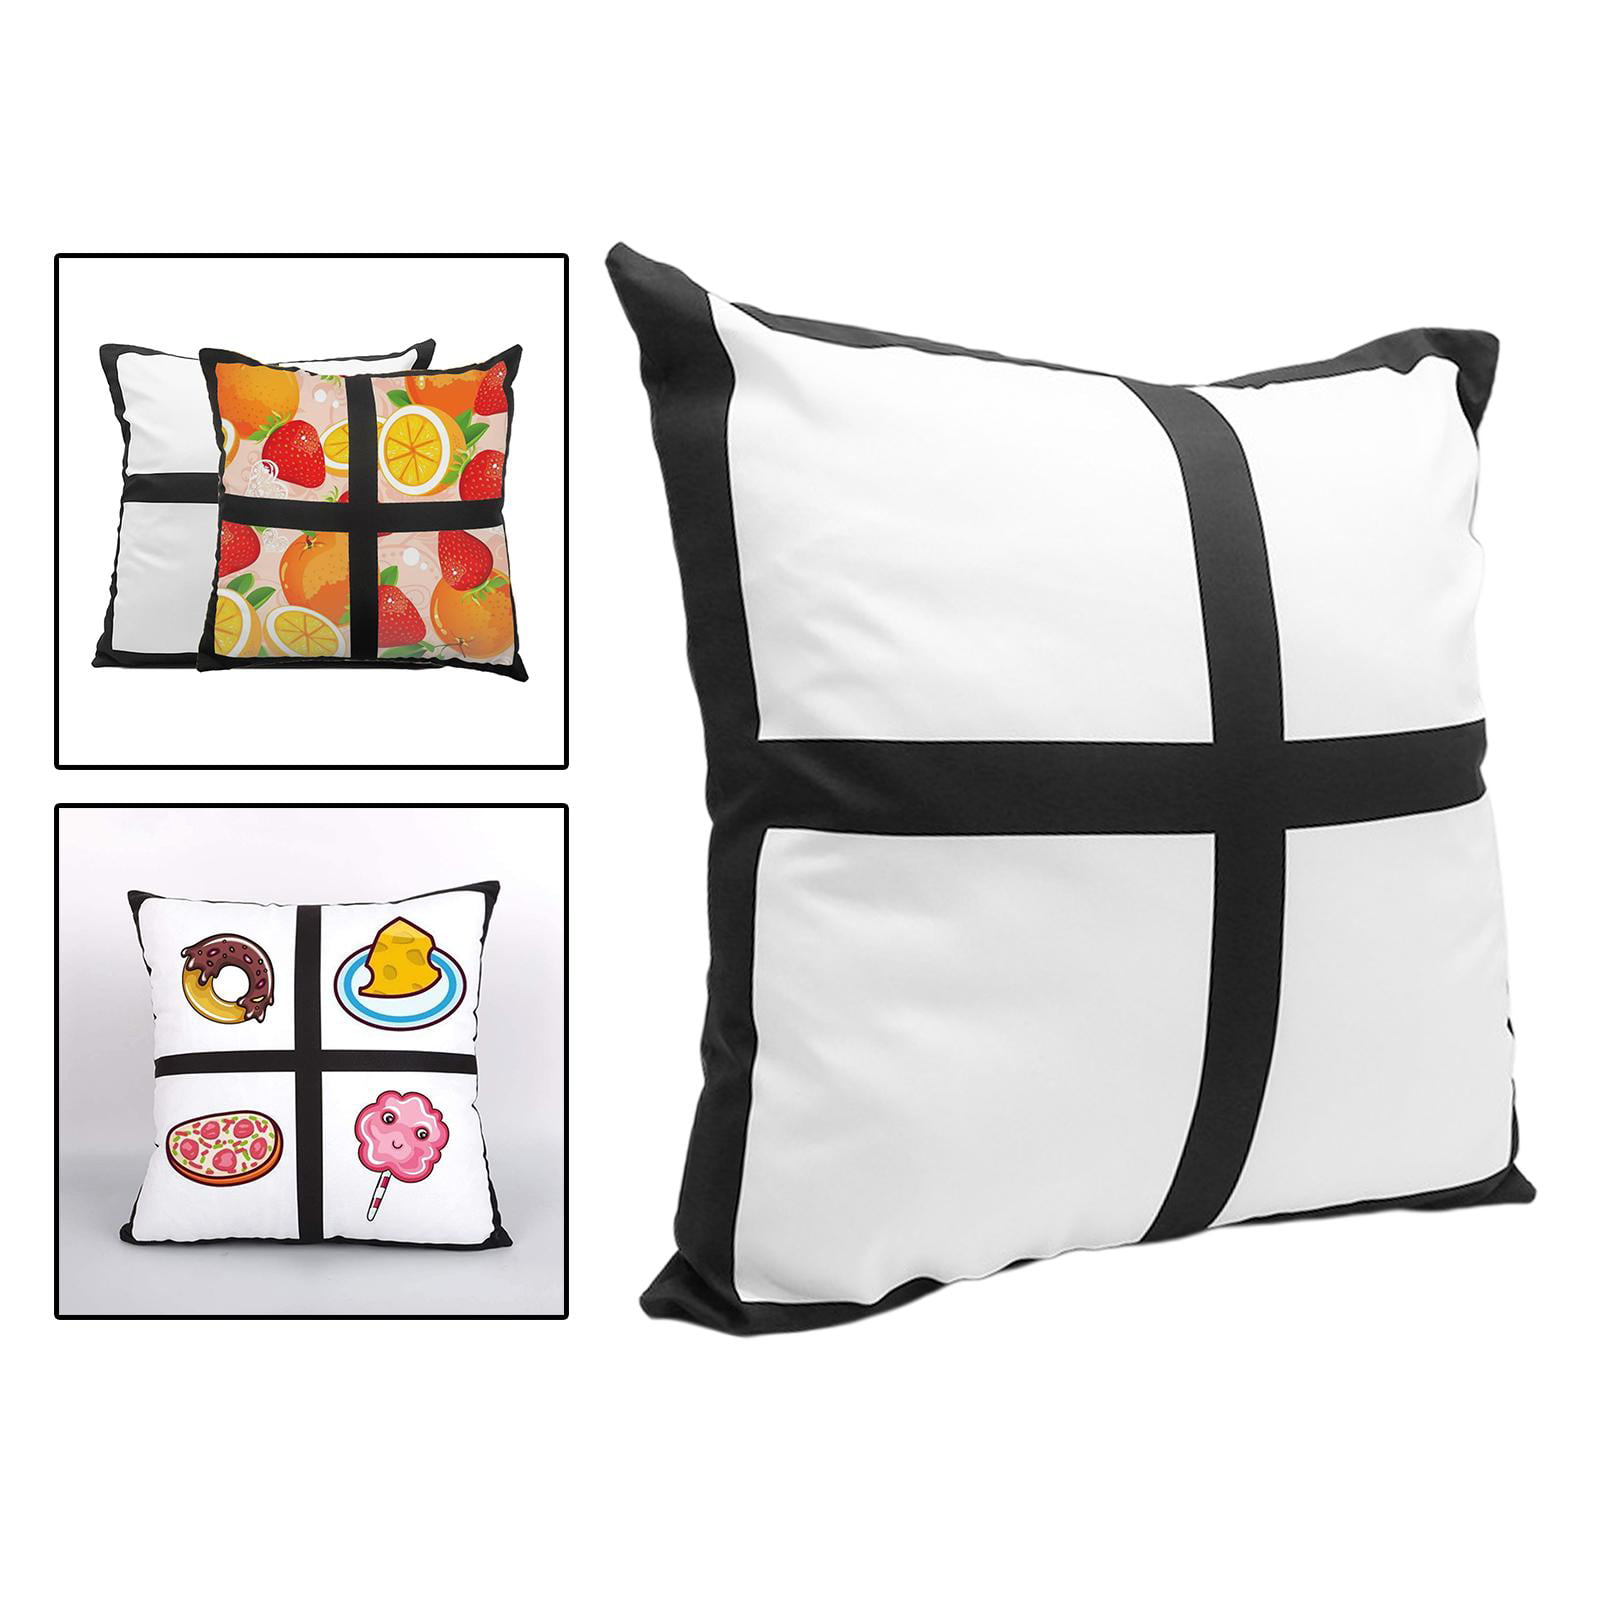 10 PACK Linen Sublimation Blank Pillow Case Cushion Cover DIY Printing 